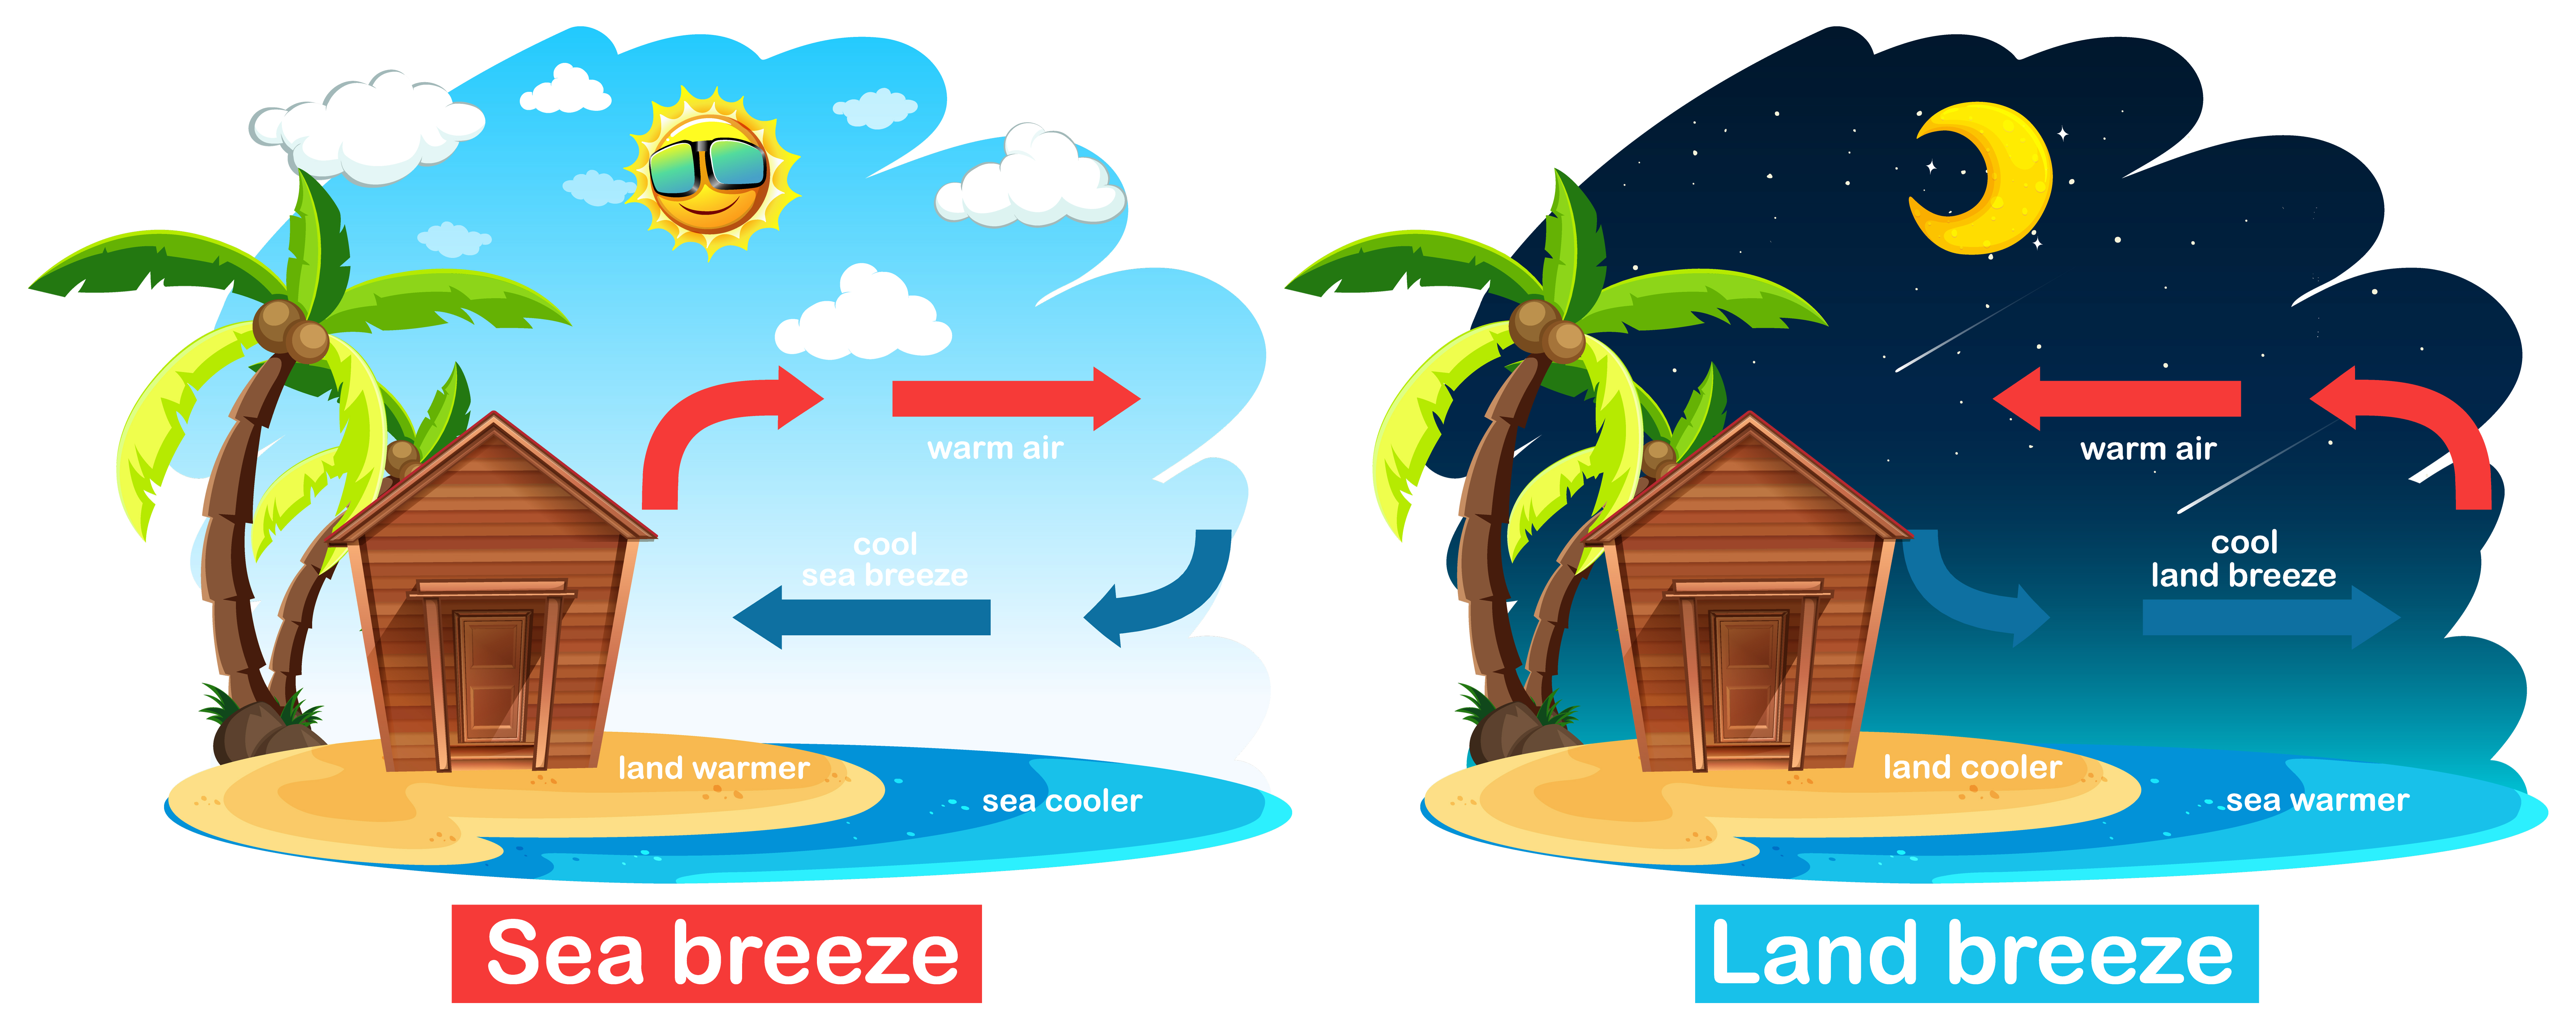 What are the land and sea breezes Explain their formation